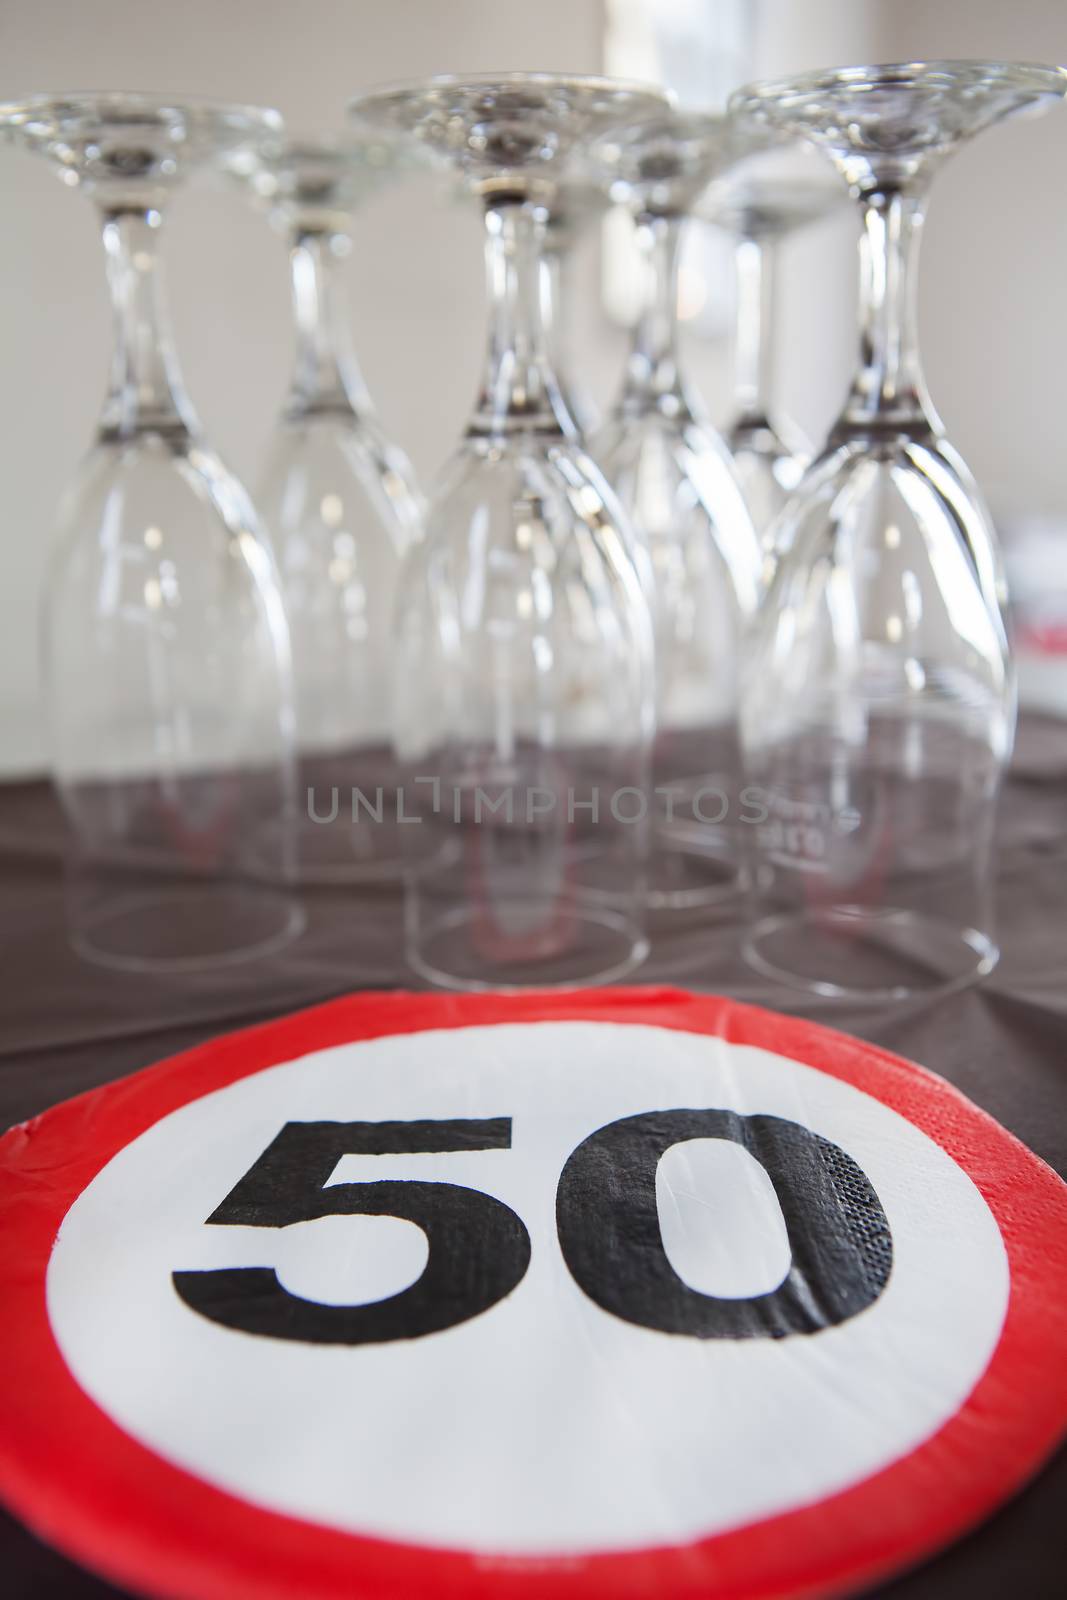 A 50th anniversary party with champagne glasses by Kasparart